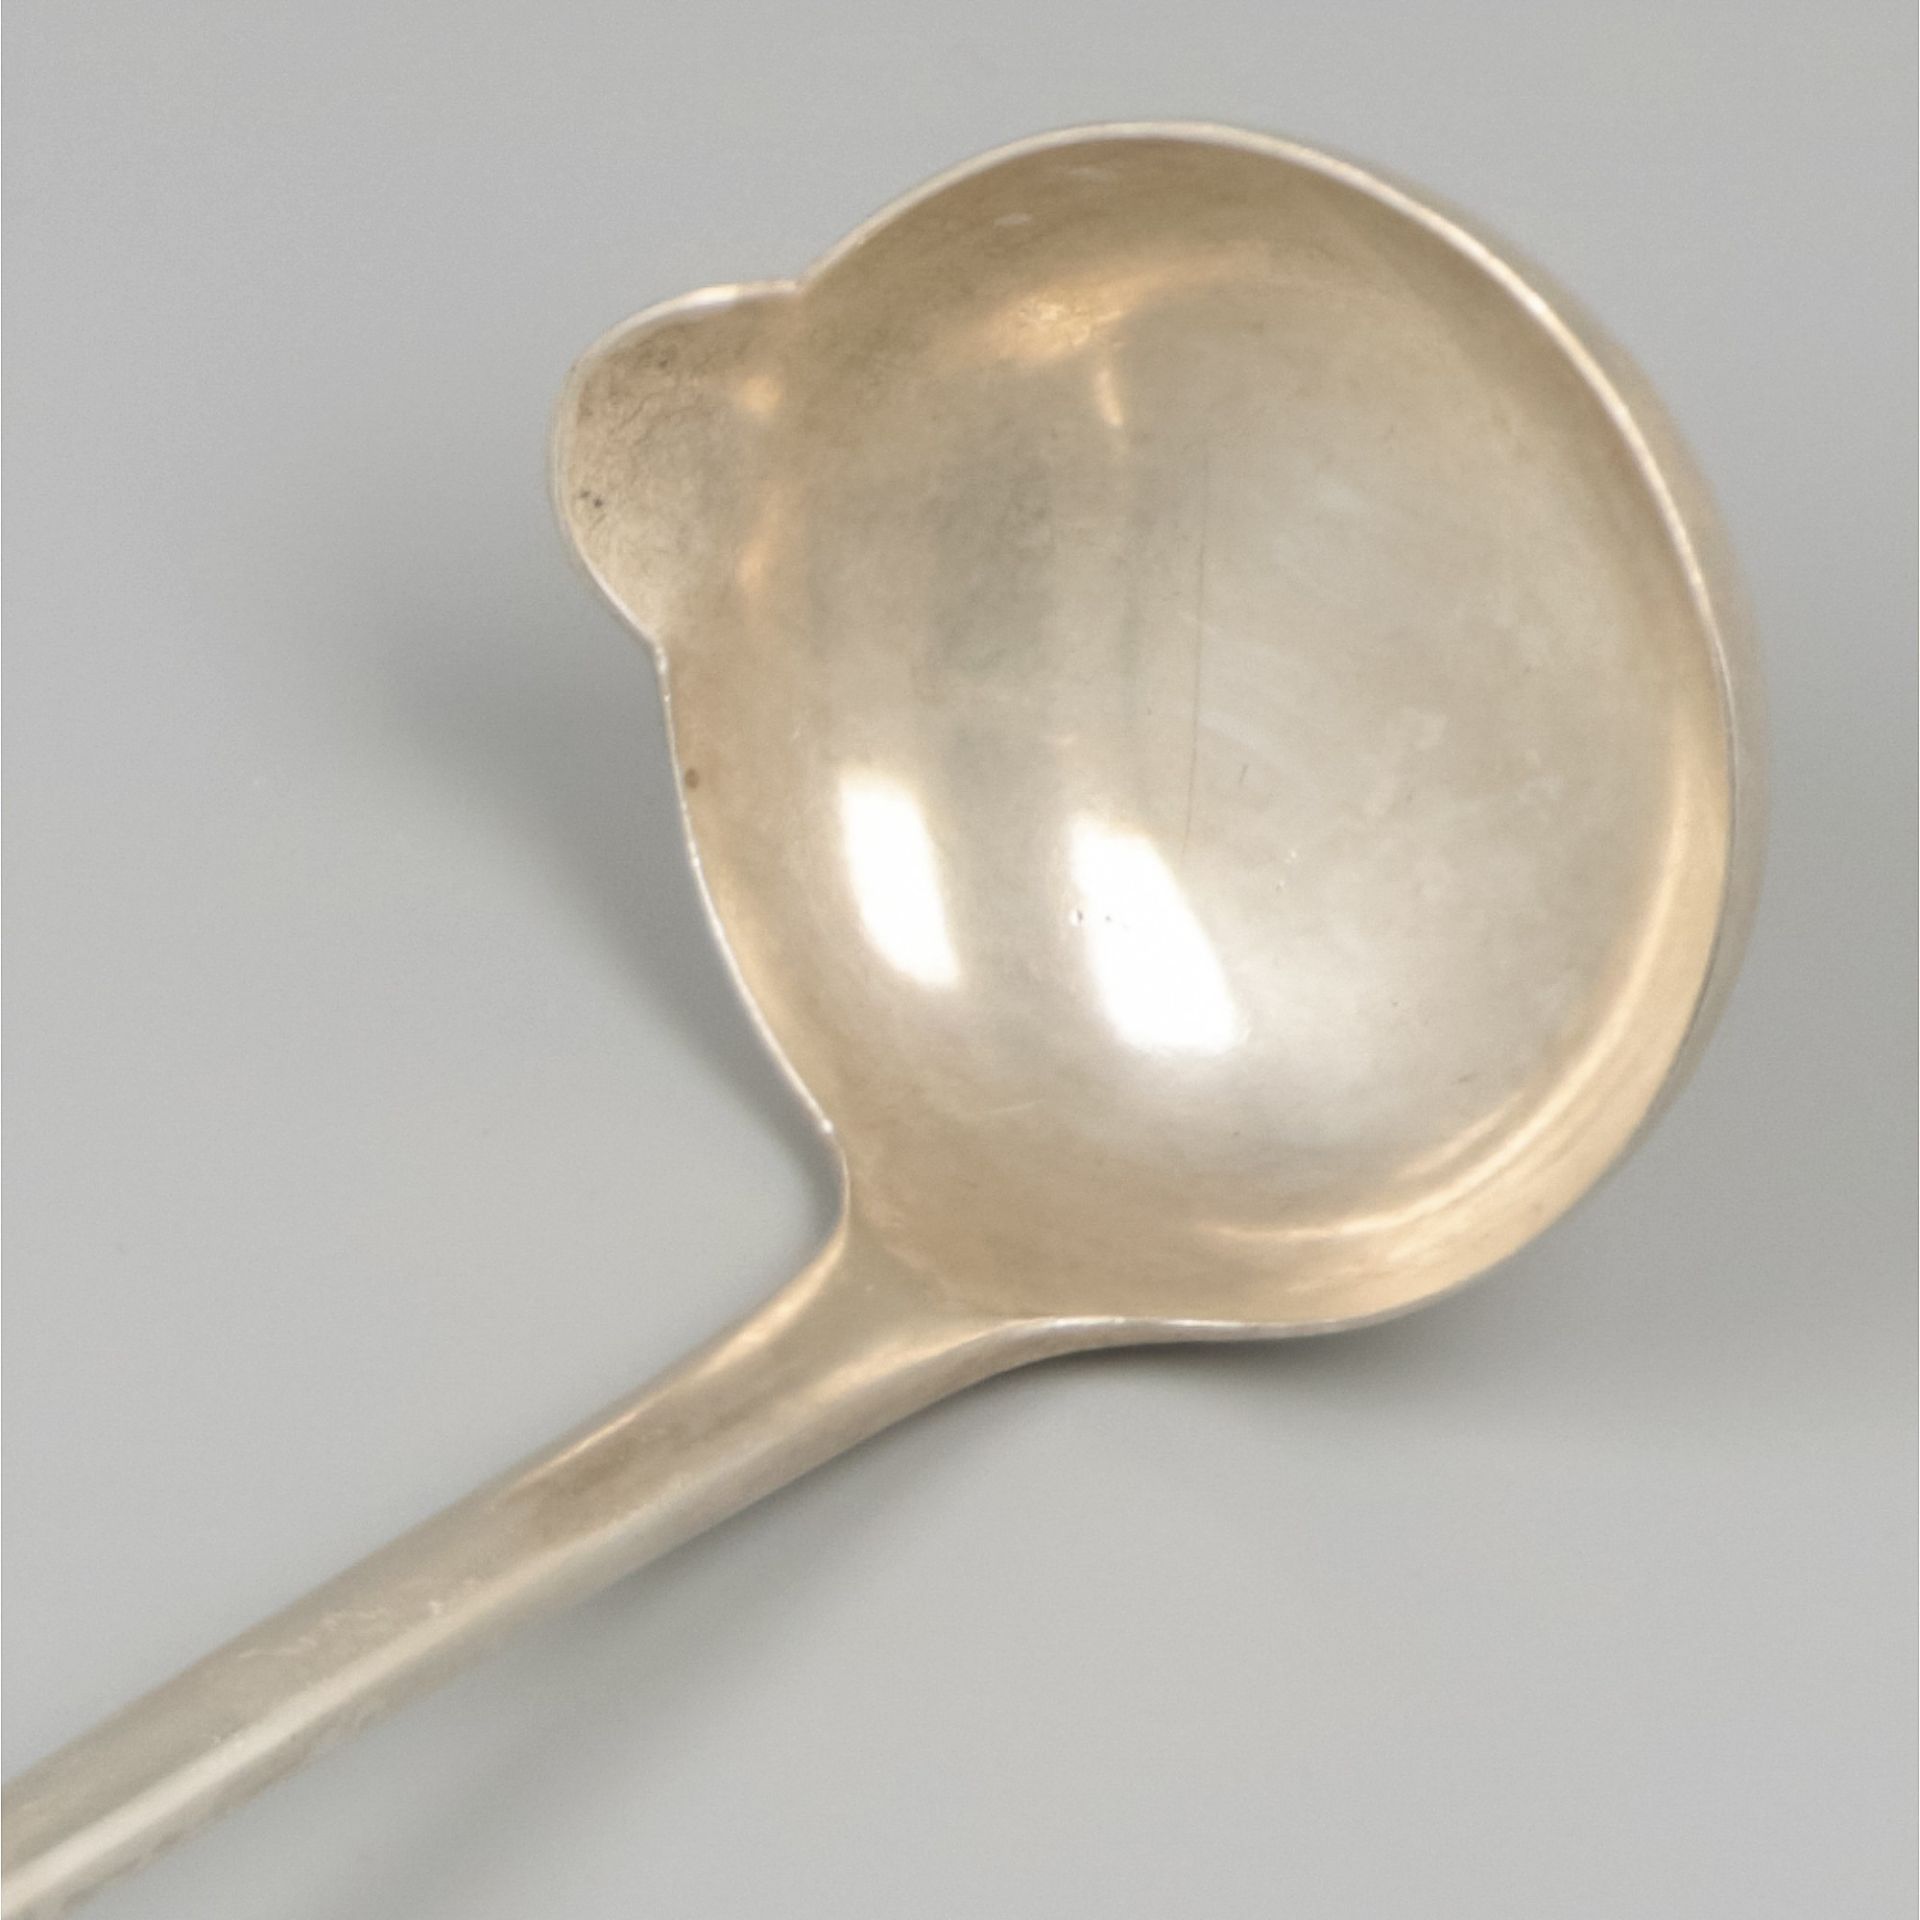 Punchbowl spoon silver. - Image 3 of 5